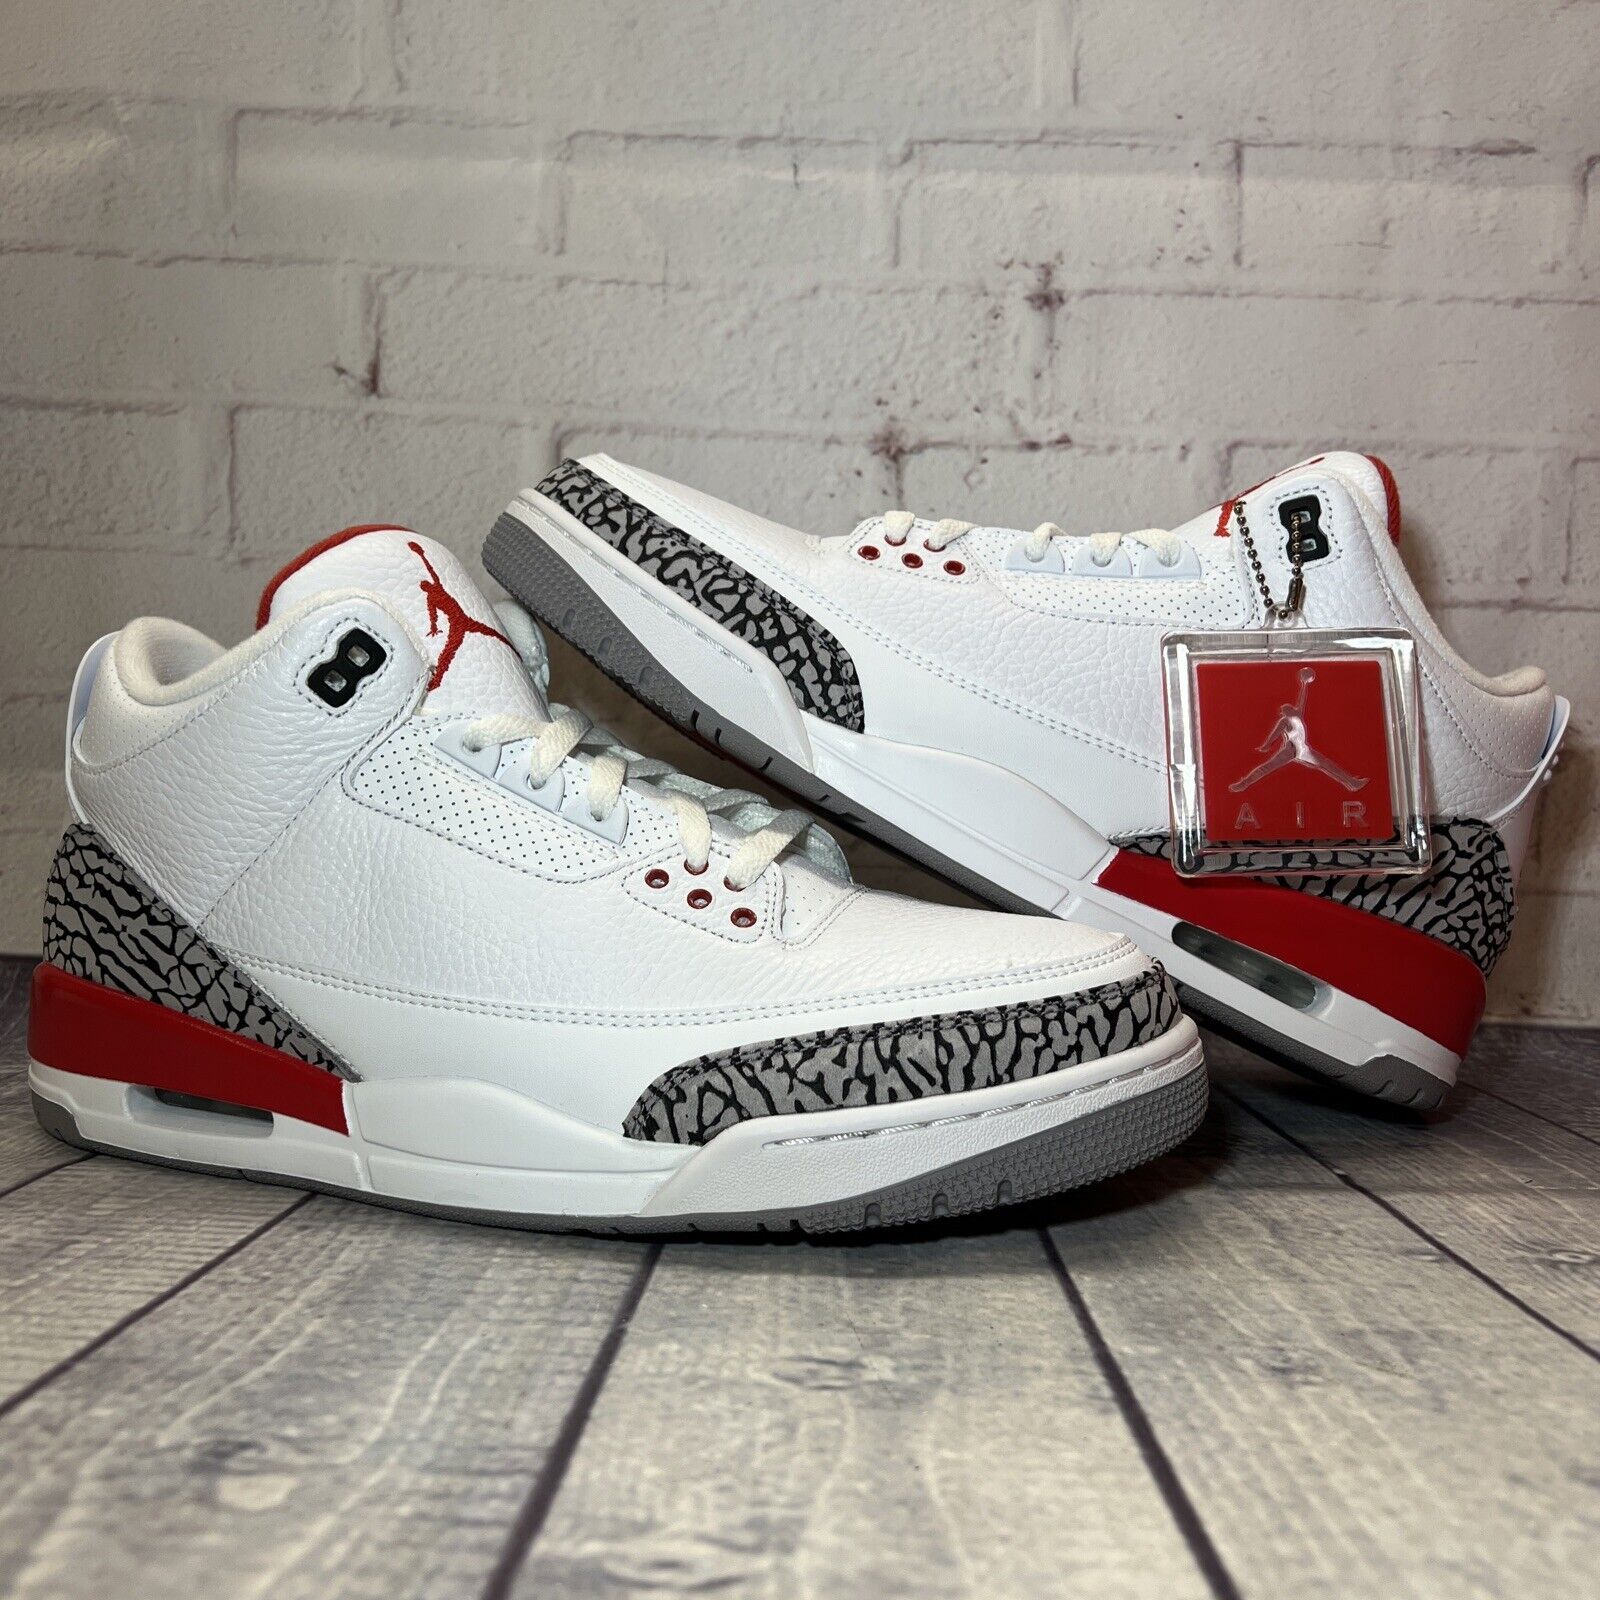 Pre-owned Jordan Nike Air Jordan 3 Retro Hall Fame 2018 White Red Size 11.5 Shoes In Red White